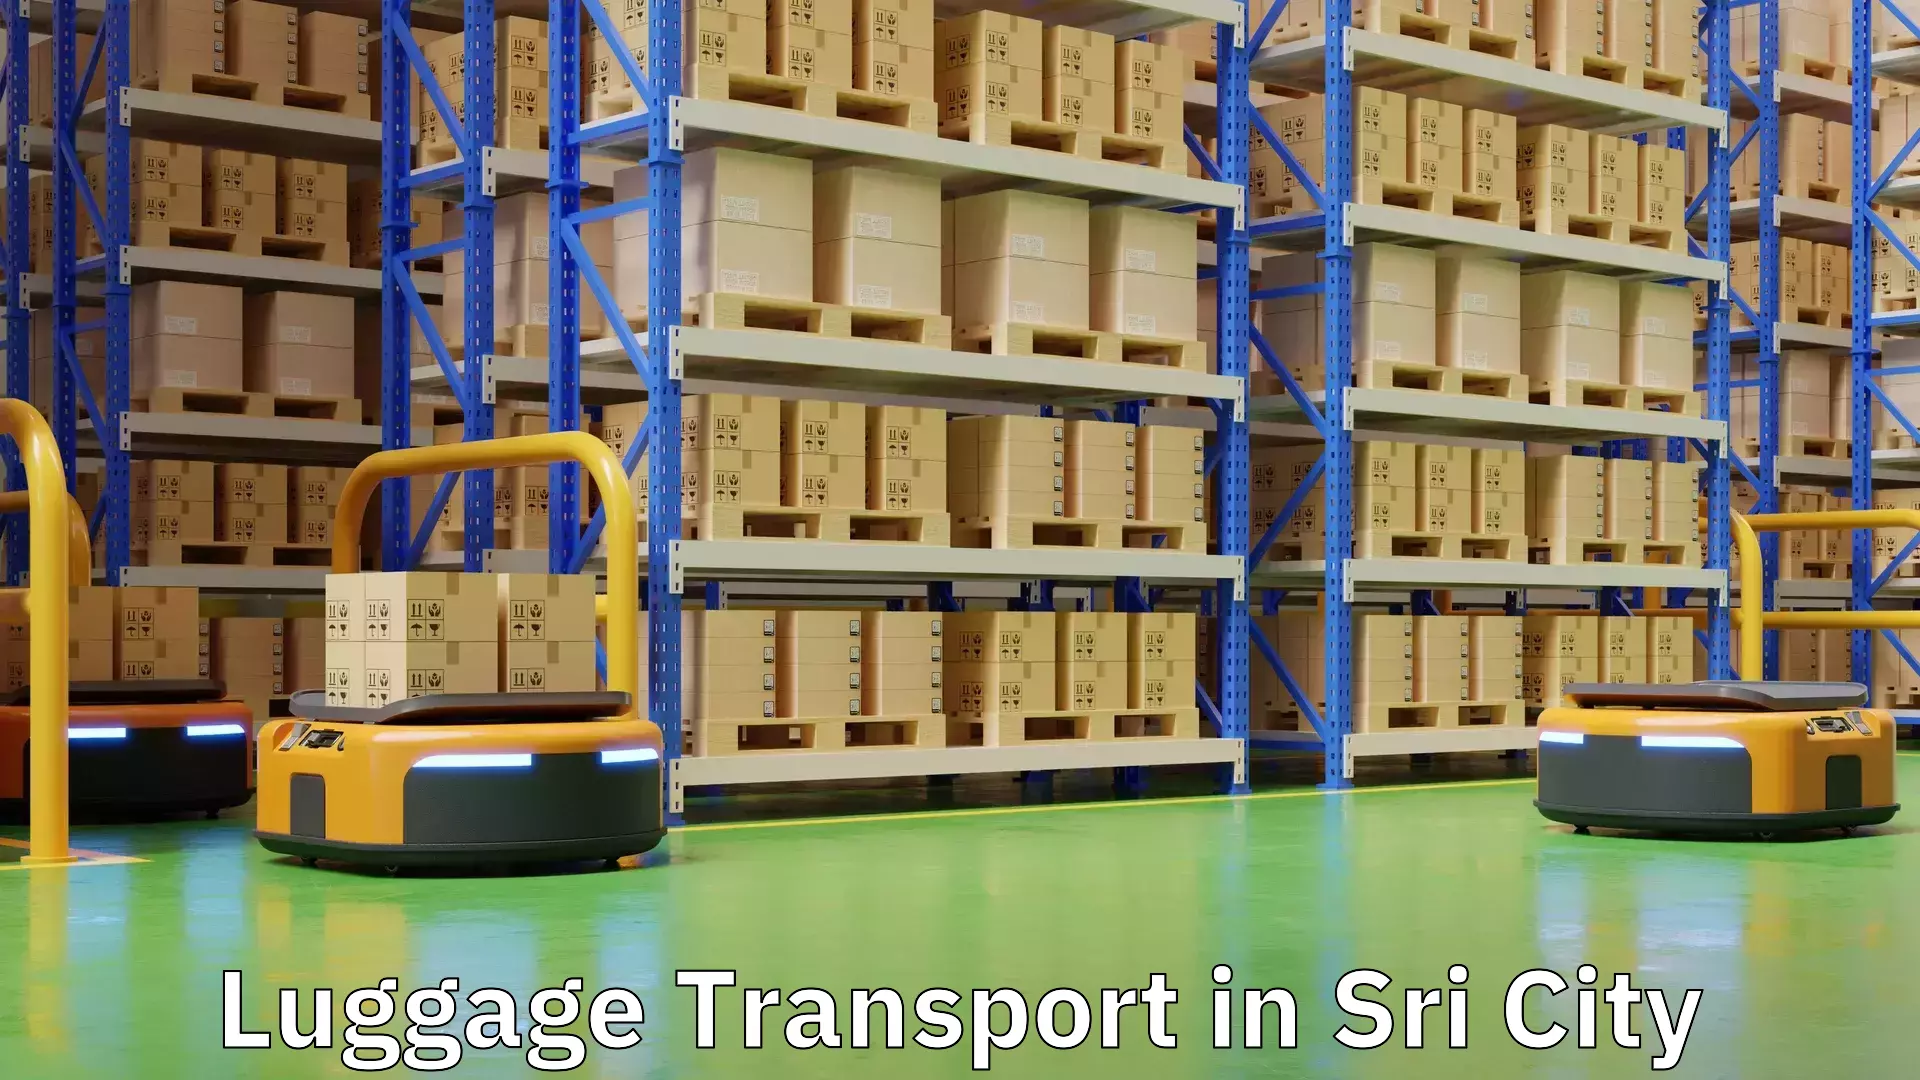 Luggage shipping strategy in Sri City